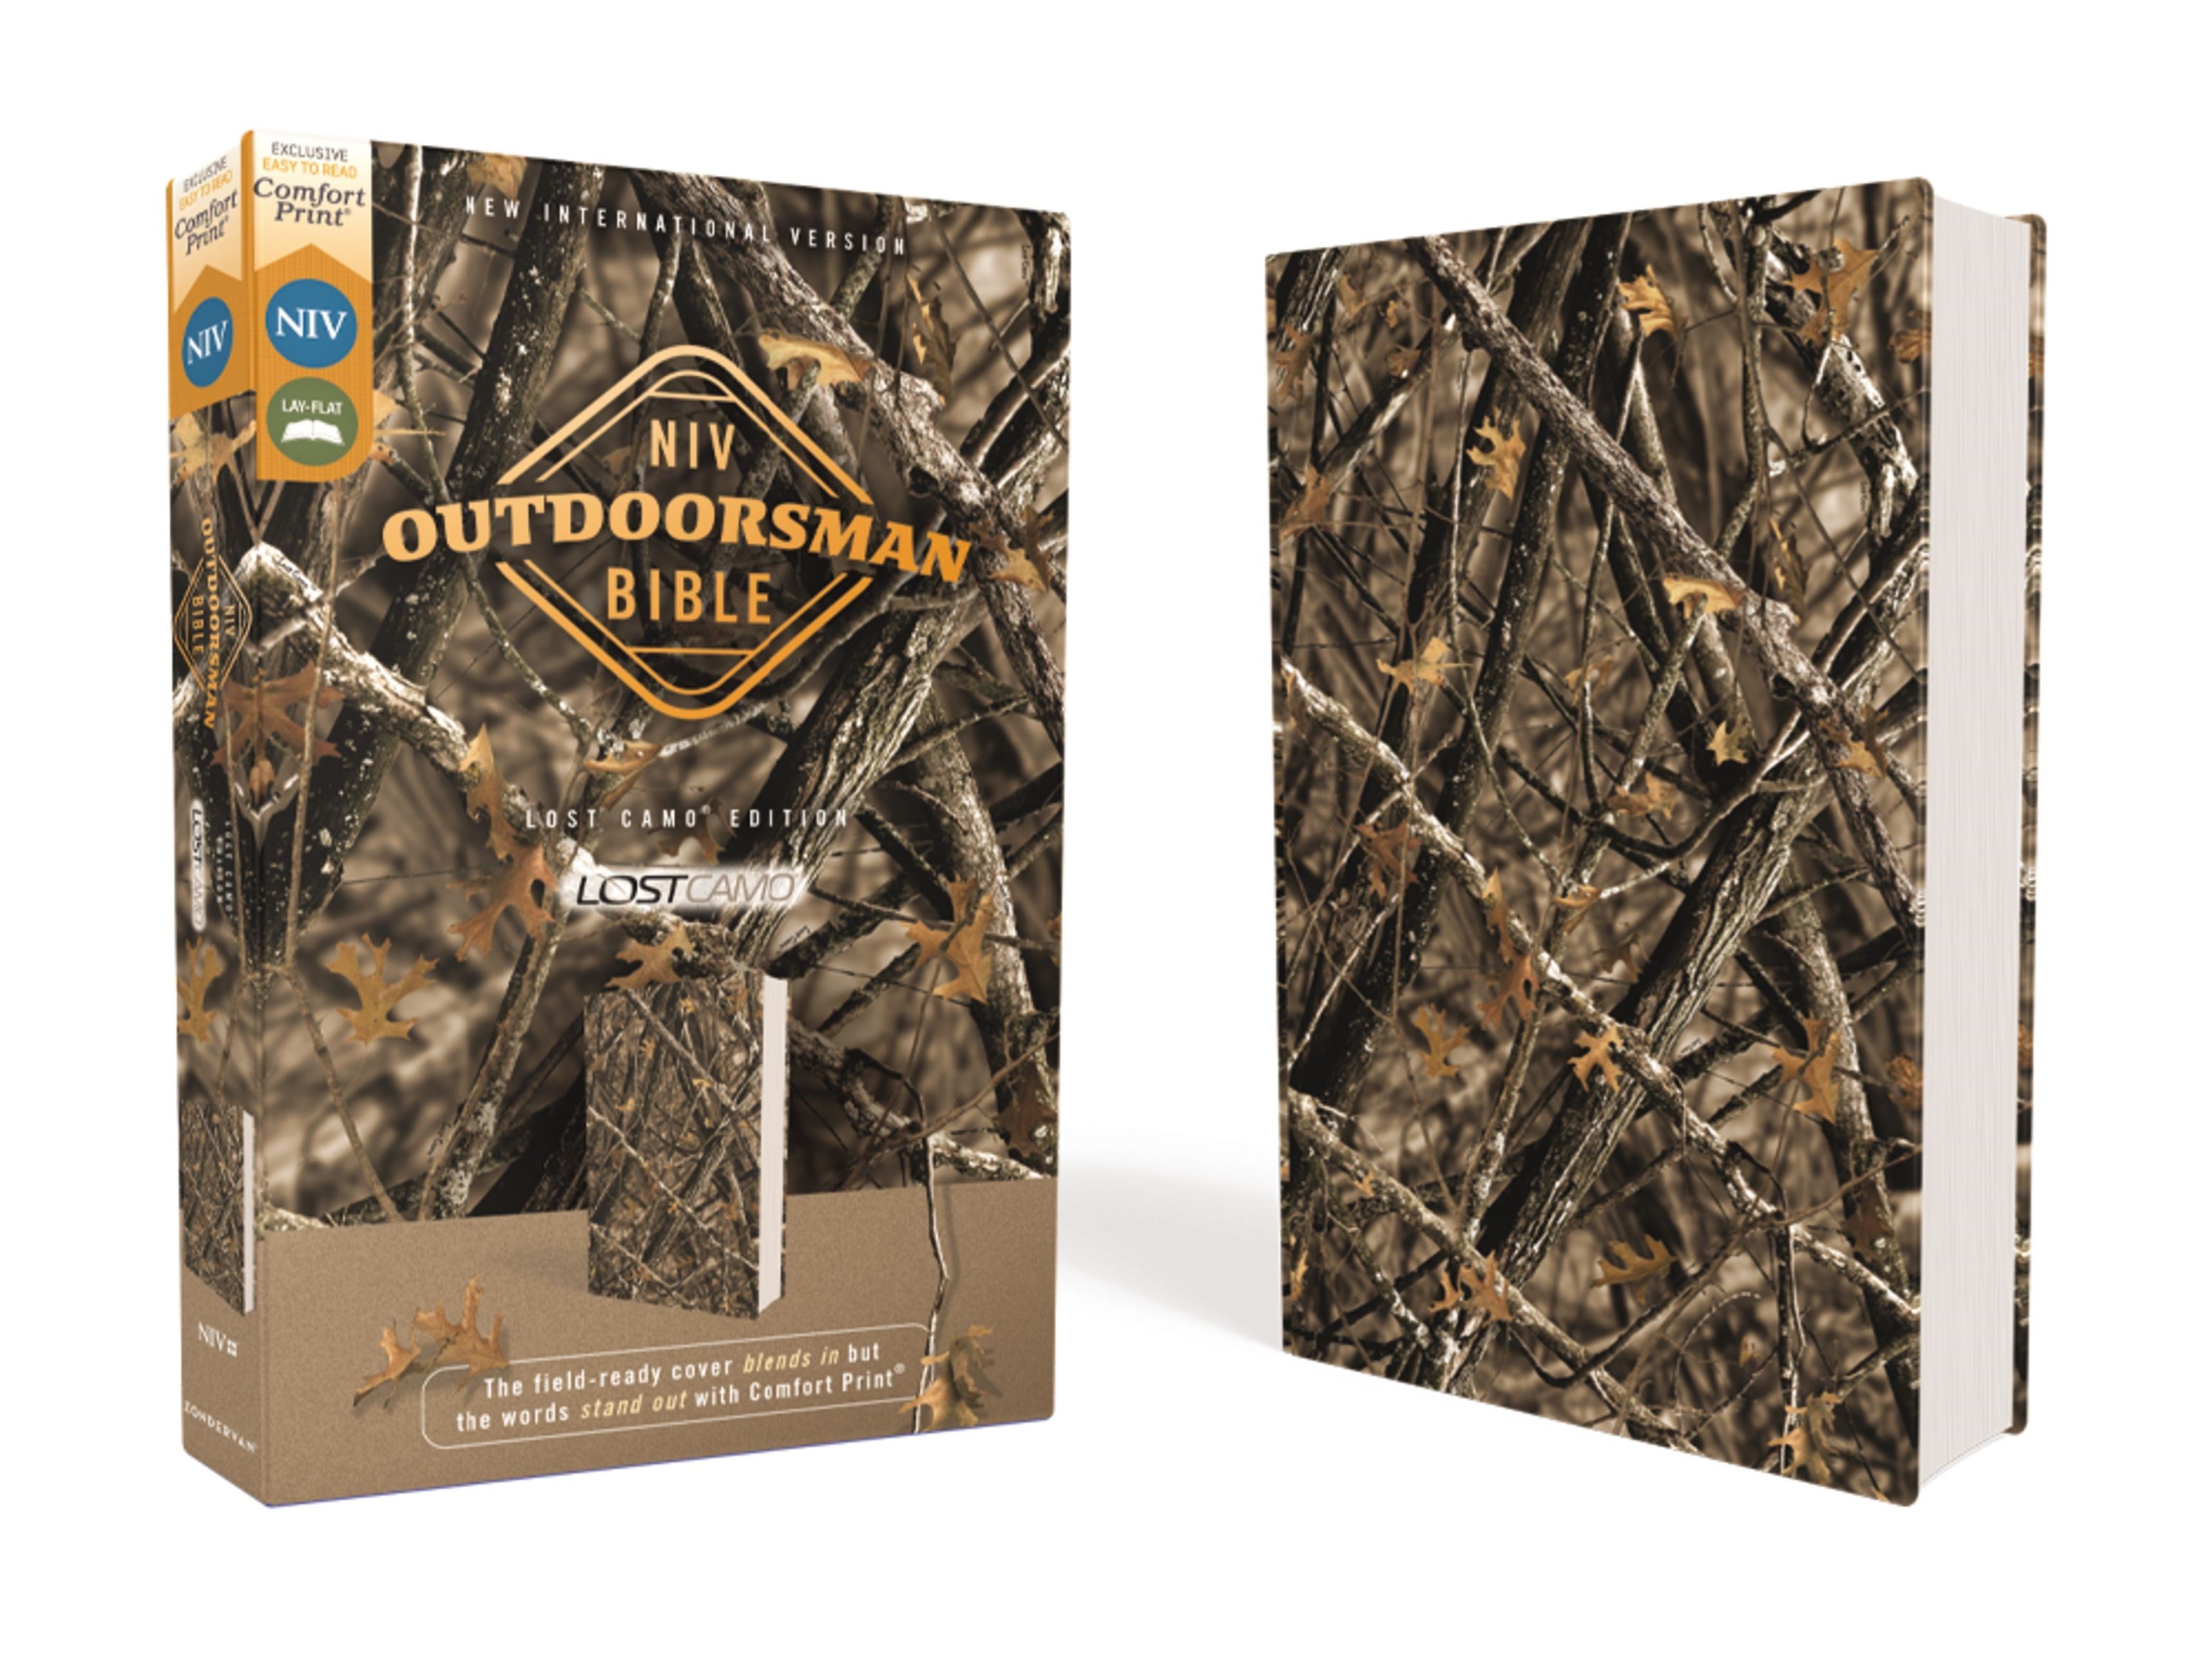 NIV, Outdoorsman Bible, Lost Camo Edition, Leathersoft, Red Letter, Comfort Print: The Field-Ready Cover Blends In but the Words Stand Out with Comfort Print